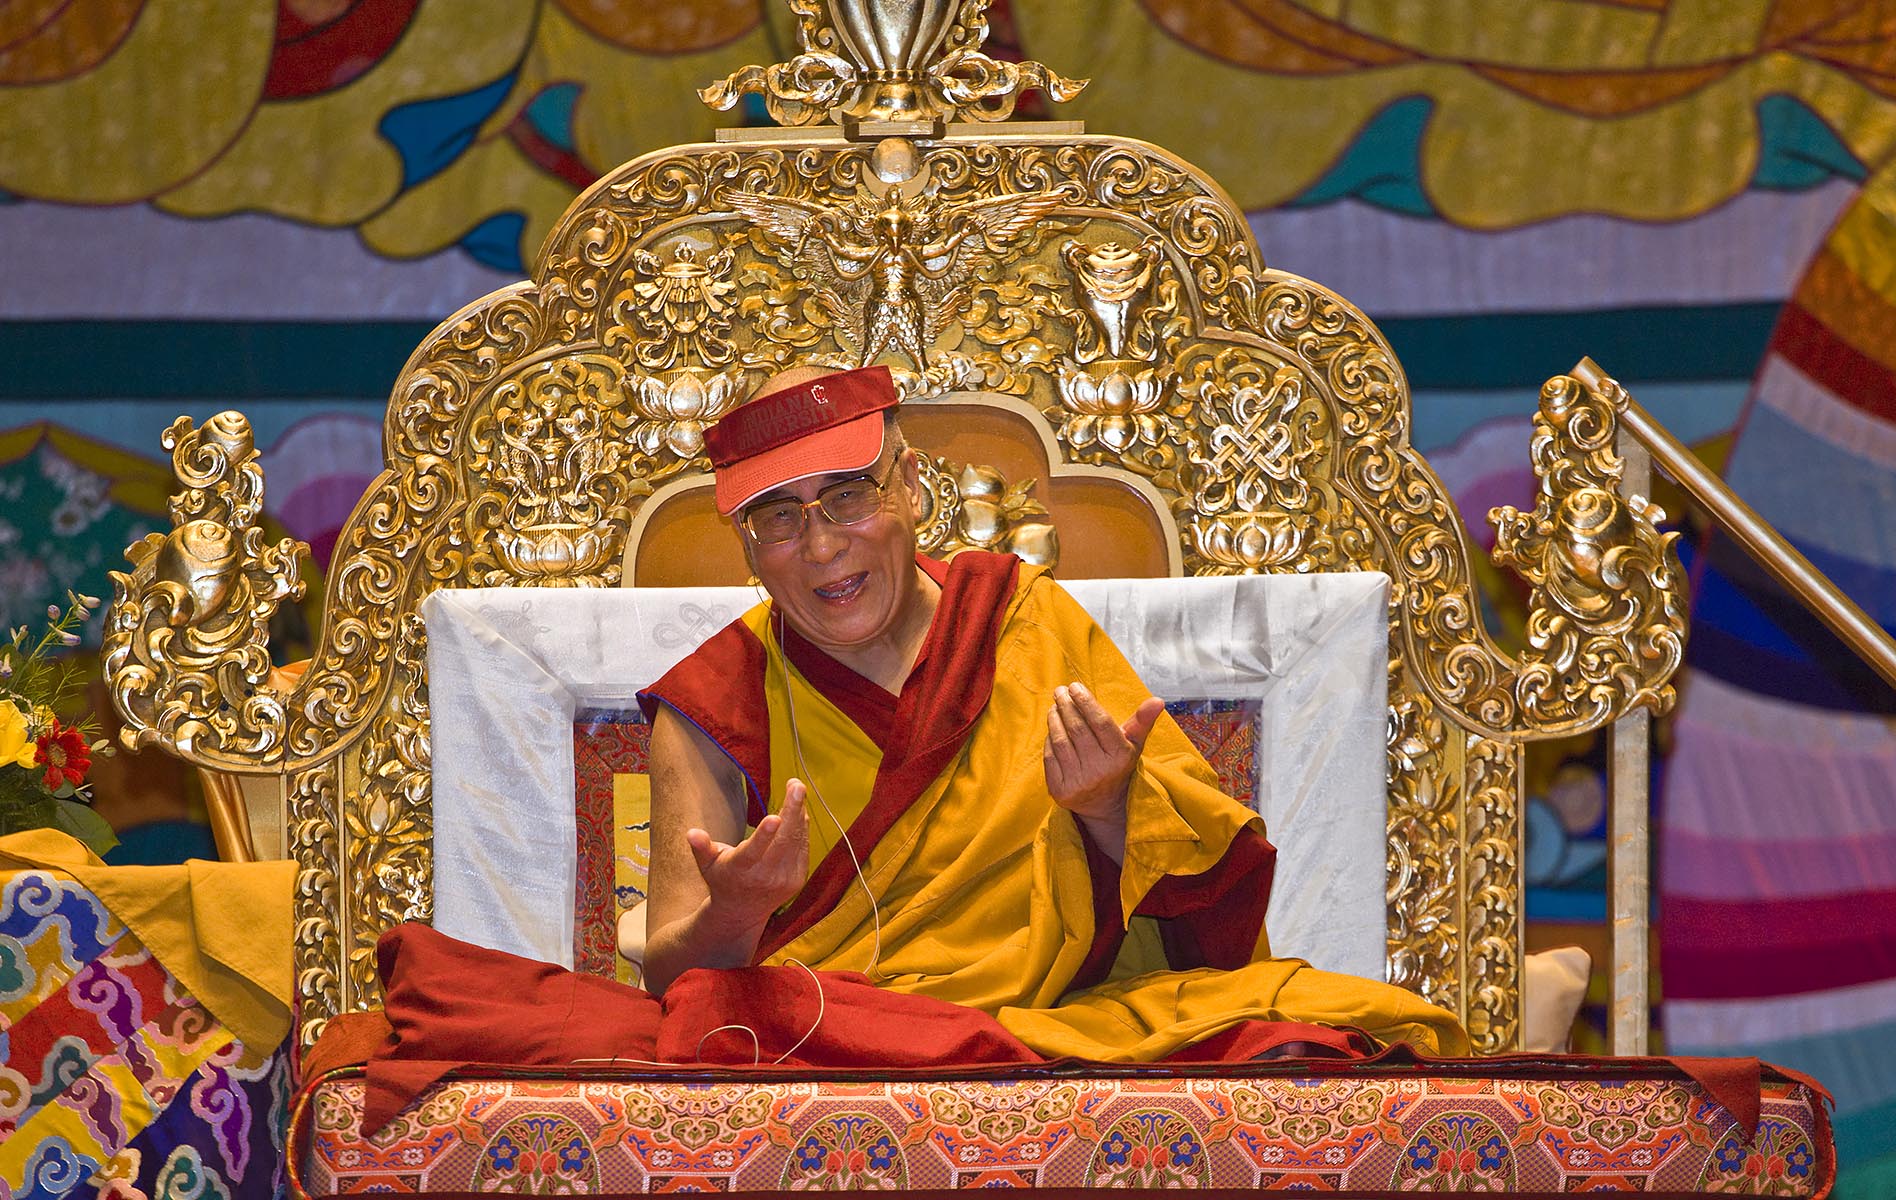 The 14th DALAI LAMA of Tibet teaches Buddhism sponsored by the TIBETAN MONGOLIAN CULTURAL CENTER - BLOOMINGTON, INDIANA